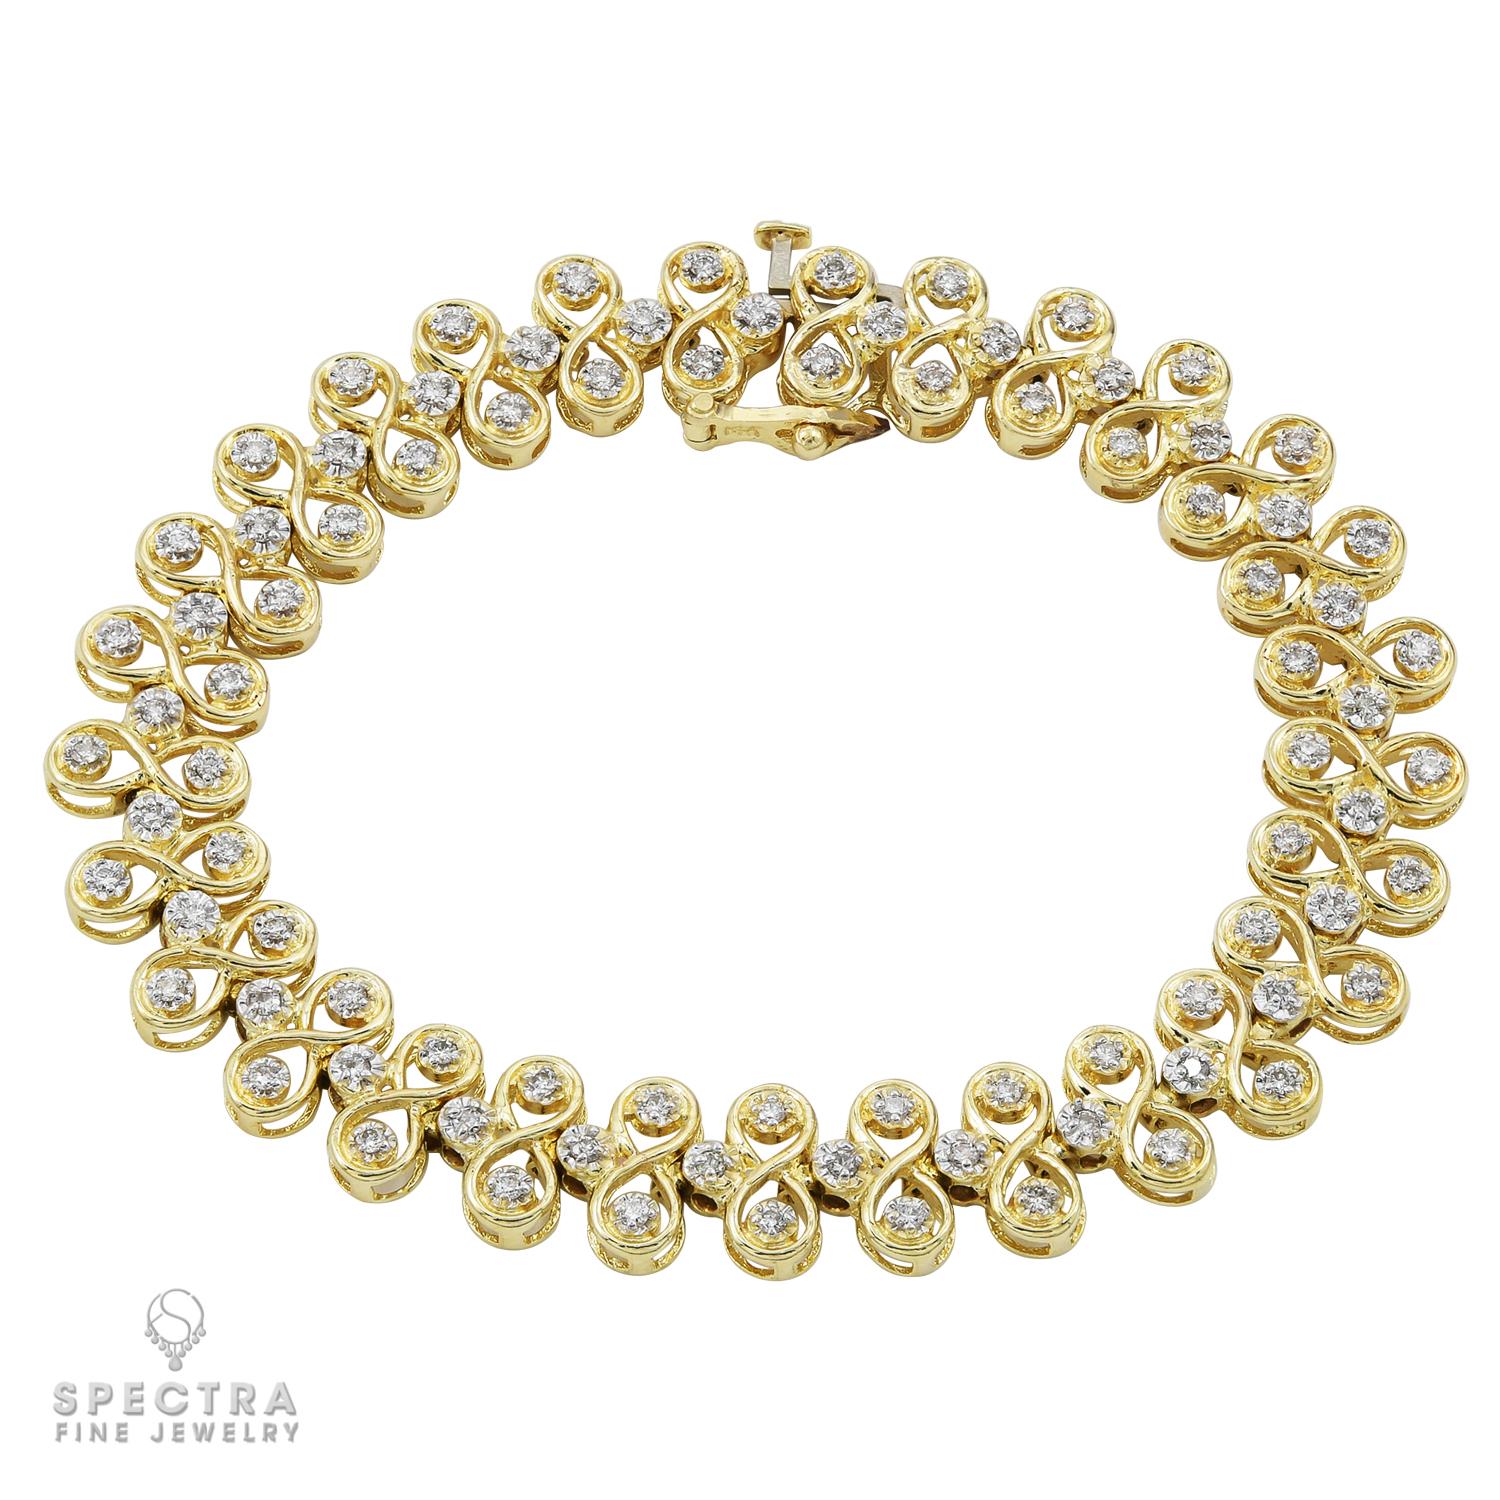 A flexible bracelet comprising of 87 diamonds weighing a total of 2.61 carats.
The diamonds are natural with approximately G-H color, VS-SI clarity.
Metal is 14k yellow gold, gross weight 14.19 gram.
7 inches long.